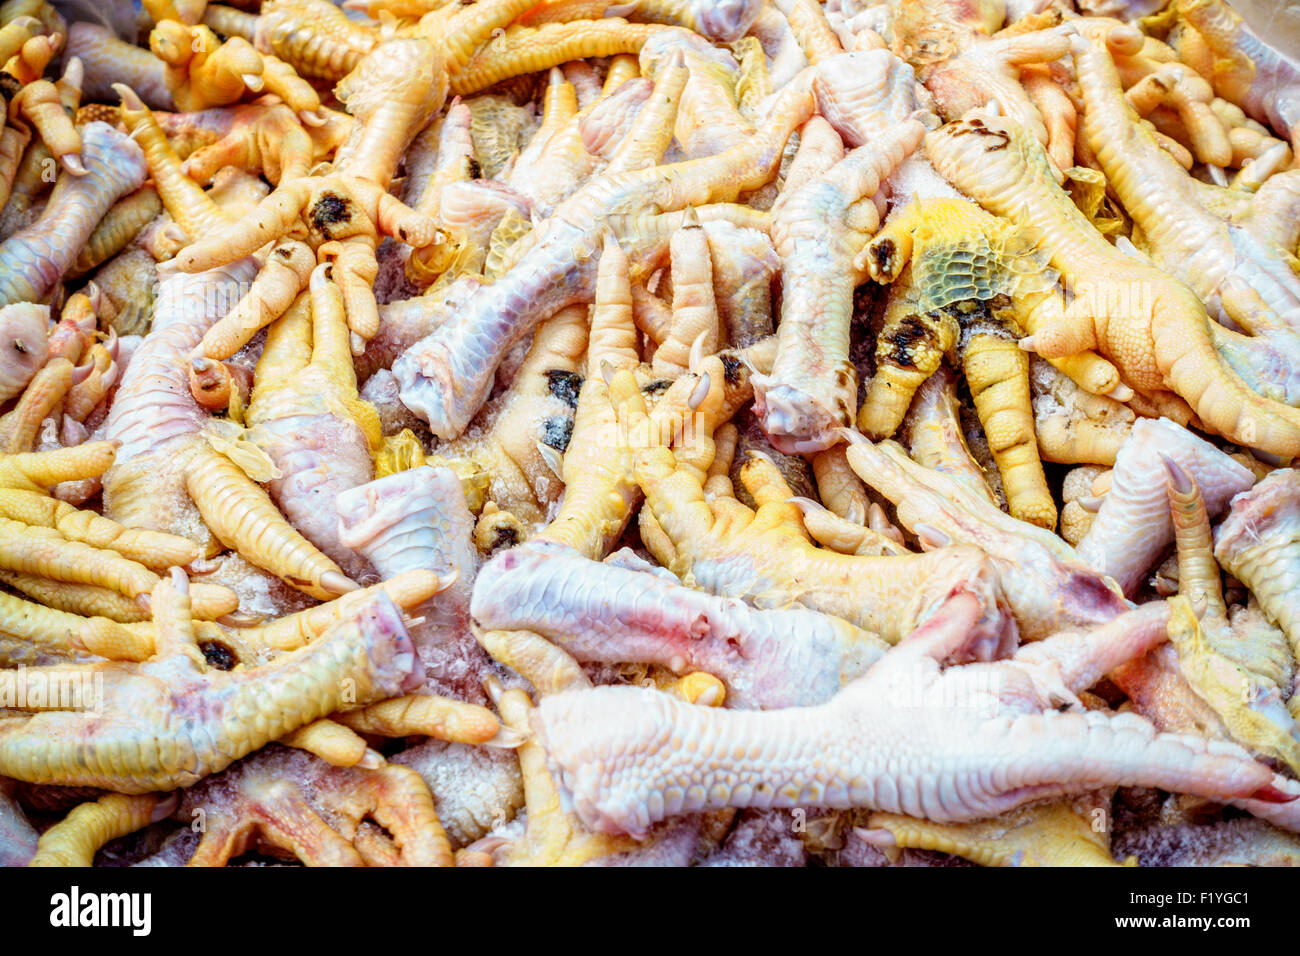 Chicken feet for sale at a farmers market in Pyatigorsk, Russia Stock Photo